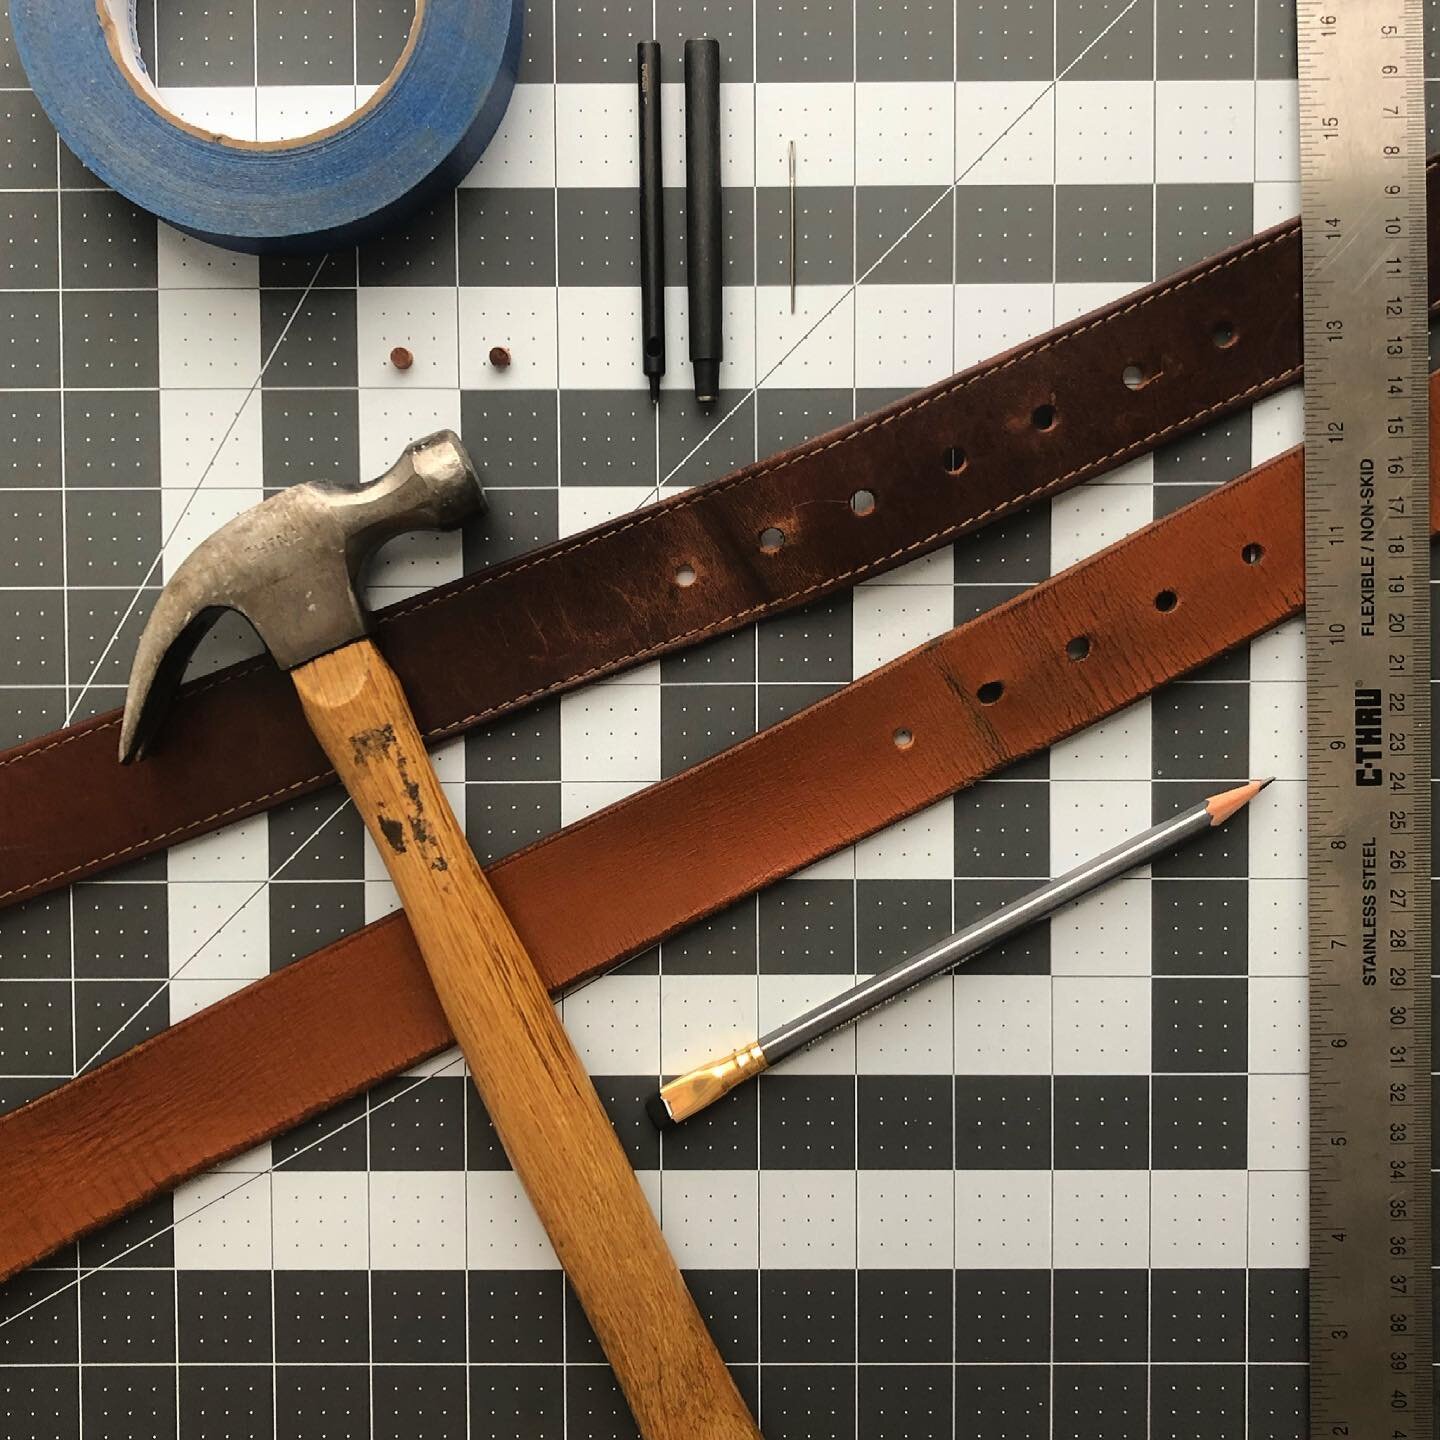 If there&rsquo;s one thing that&rsquo;s helped me more than anything else over the past, super-stressful 12 months, it&rsquo;s been the chance to run on a daily basis. The result? My belts got bigger. @heinmadegoods encouraged me to invest in a leath